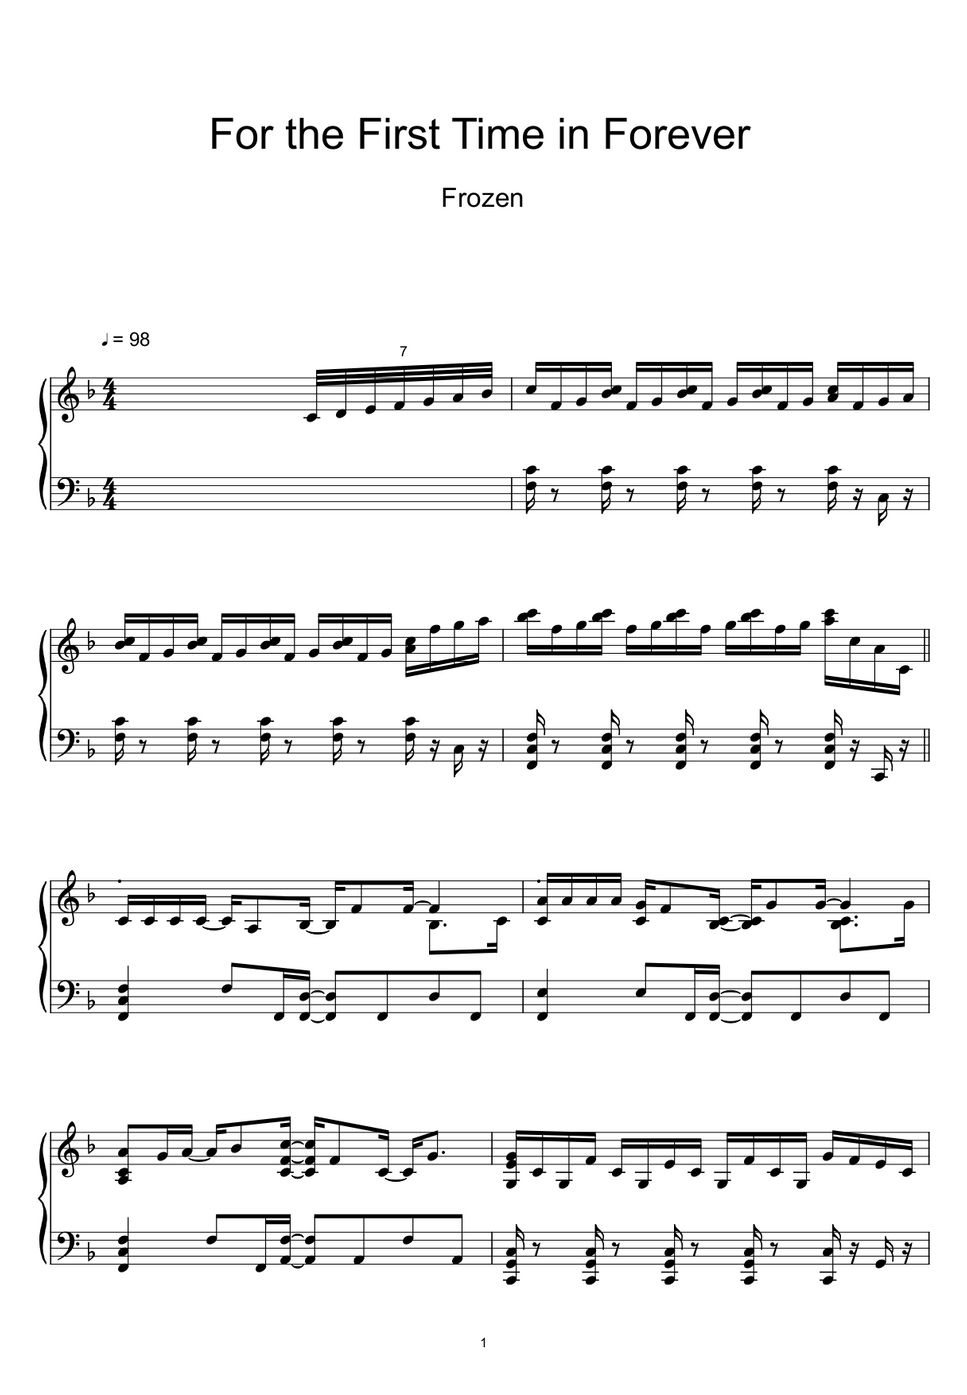 Frozen - For the First Time in Forever（from "Frozen"） (Sheet Music, MIDI,) by sayu